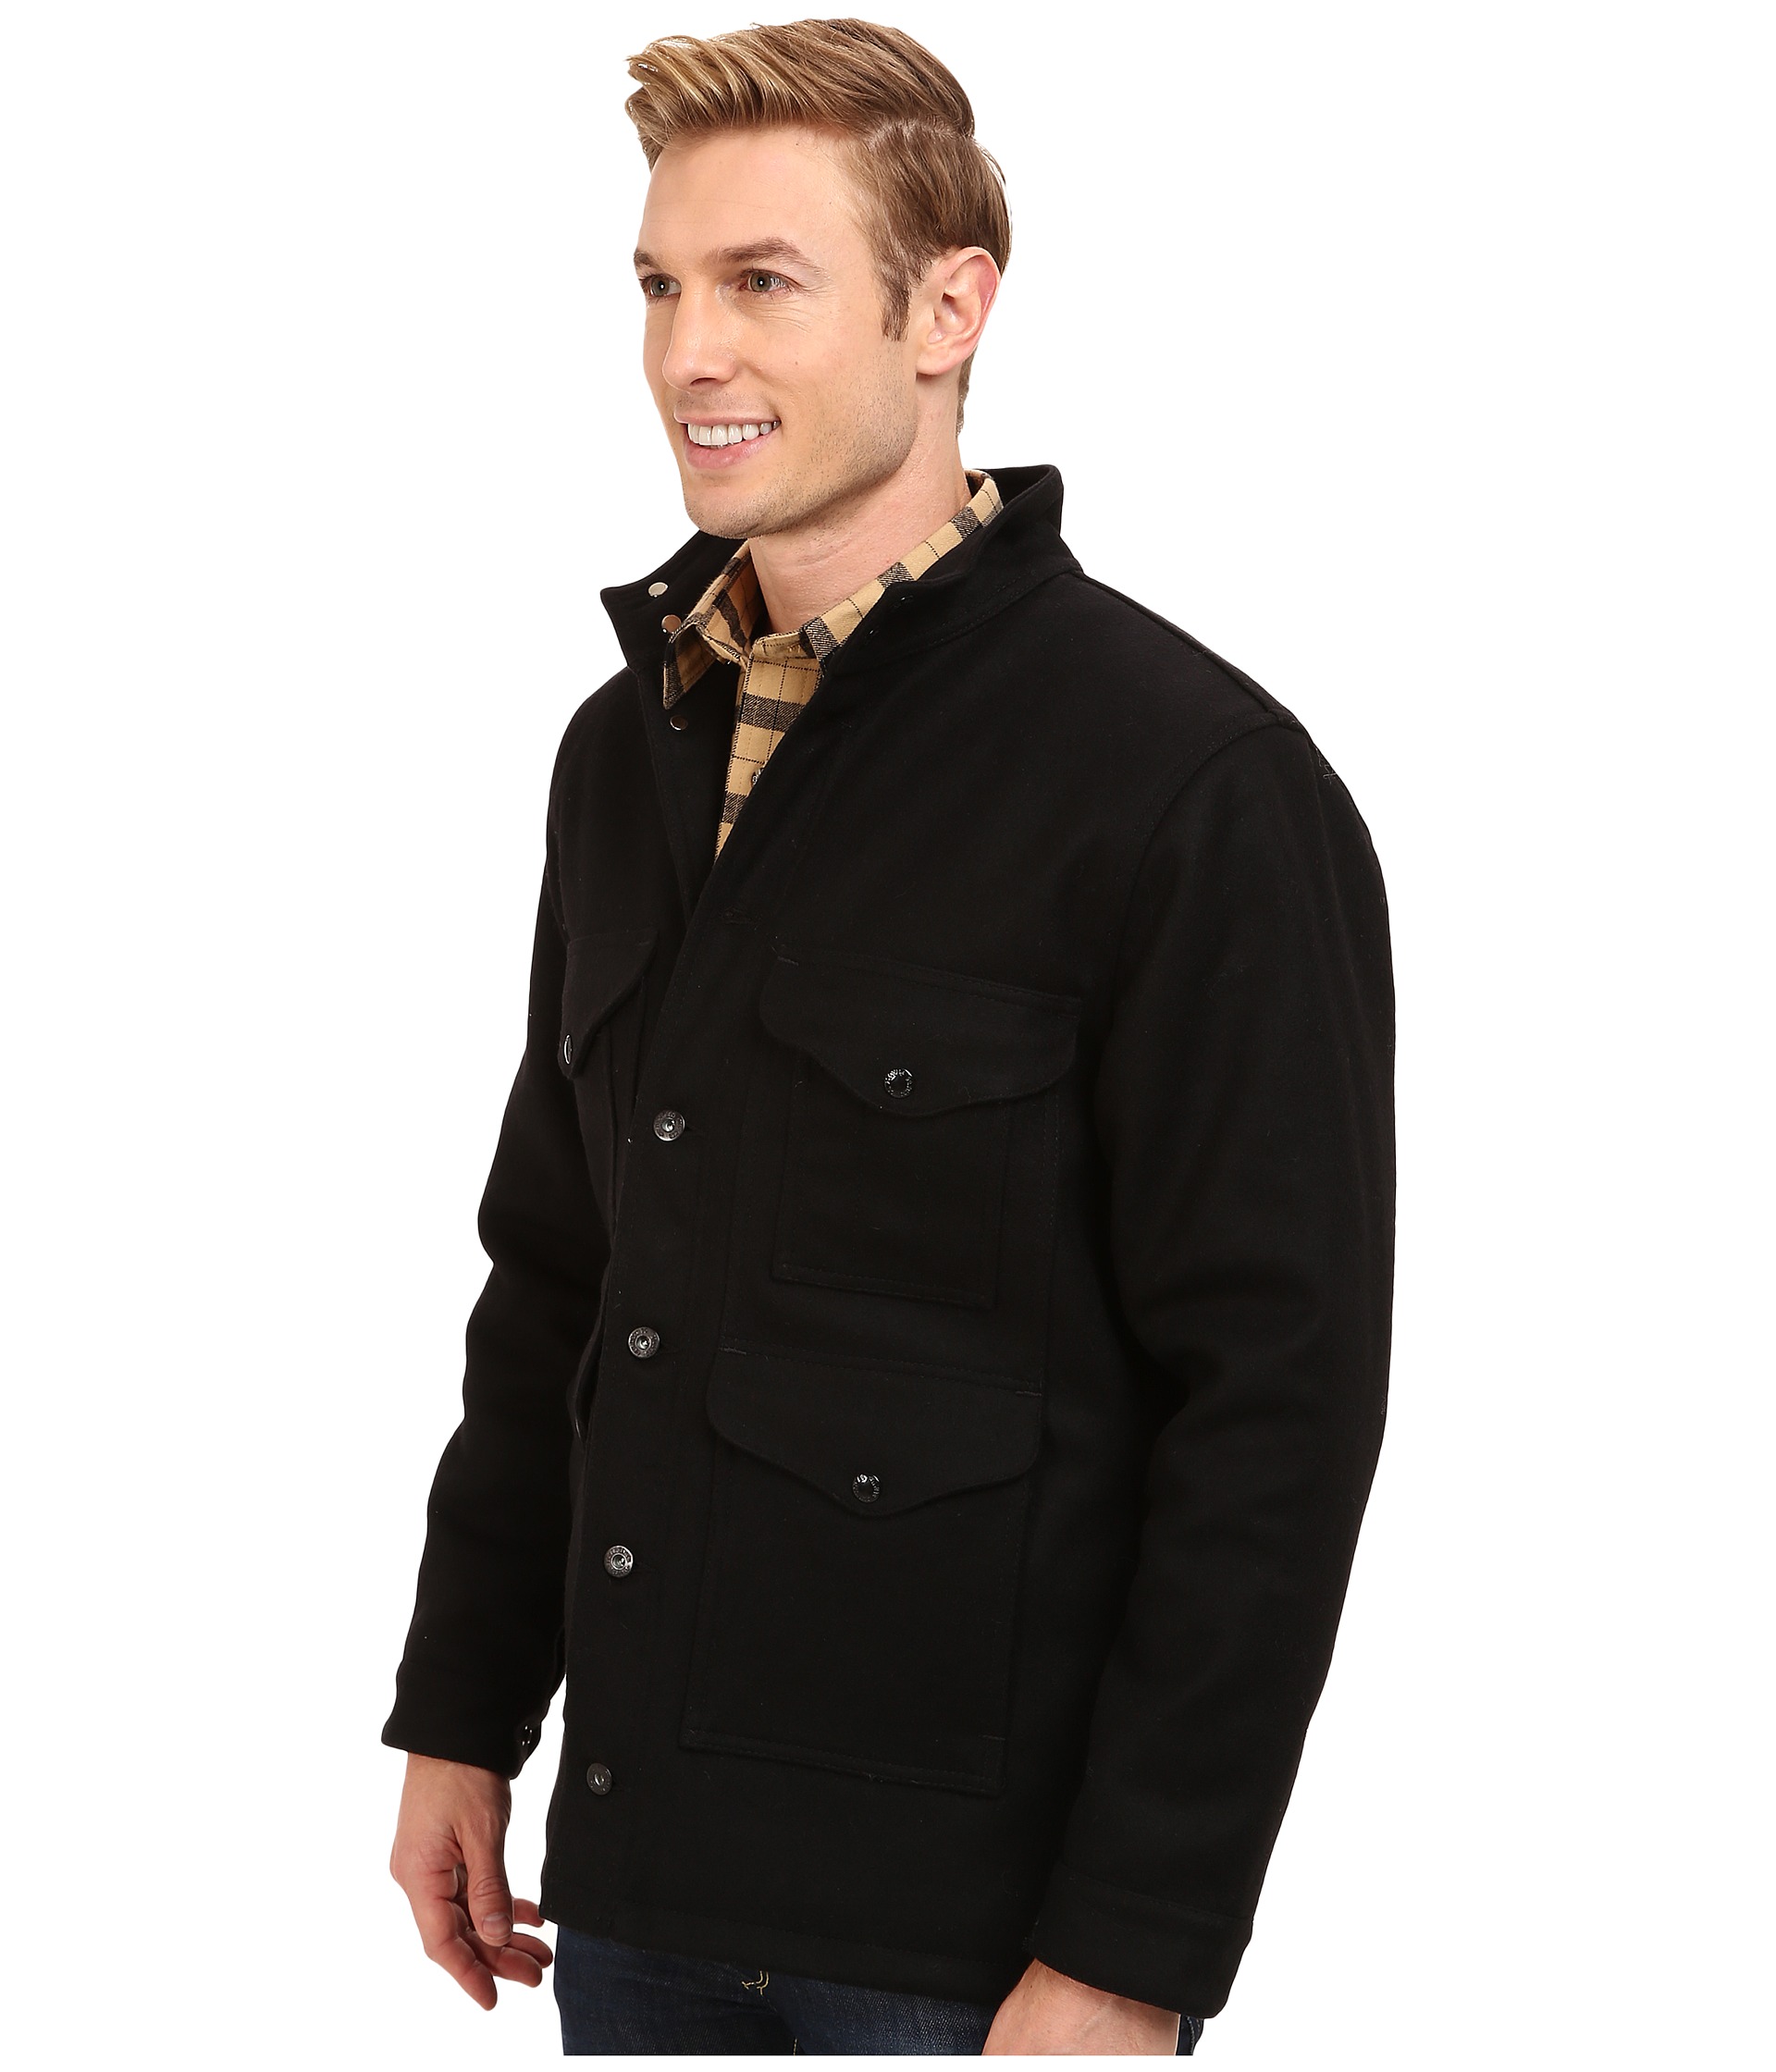 No results for filson wool greenwood jacket - Search Zappos.com